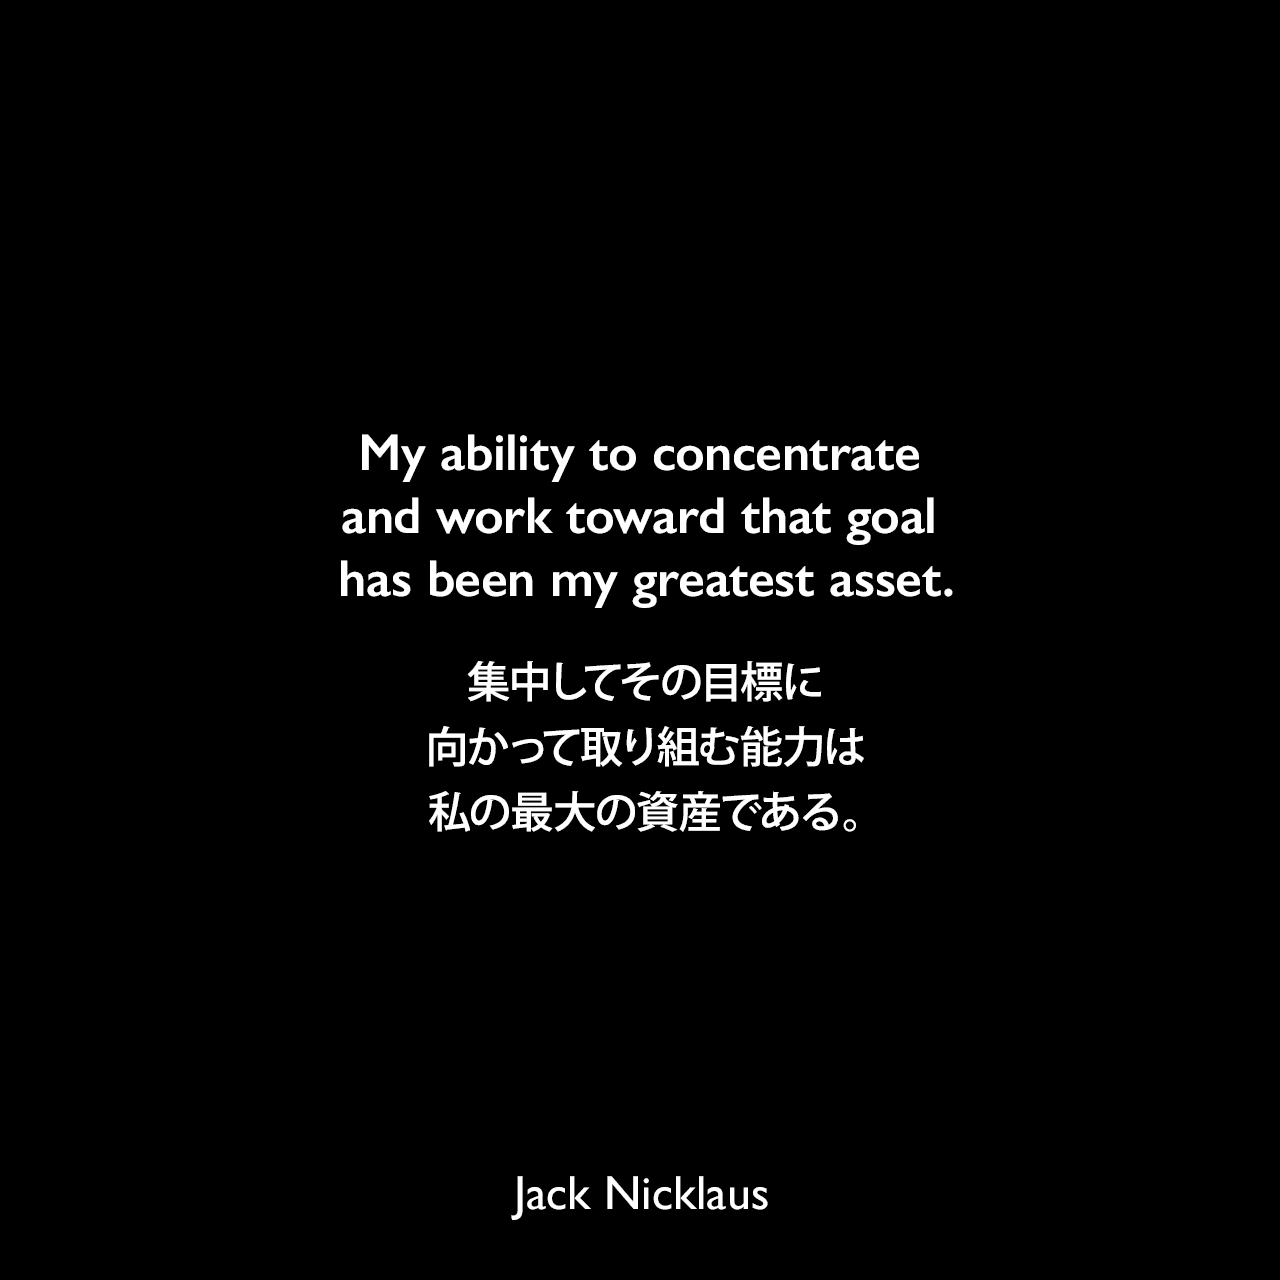 My ability to concentrate and work toward that goal has been my greatest asset.集中してその目標に向かって取り組む能力は、私の最大の資産である。Jack Nicklaus